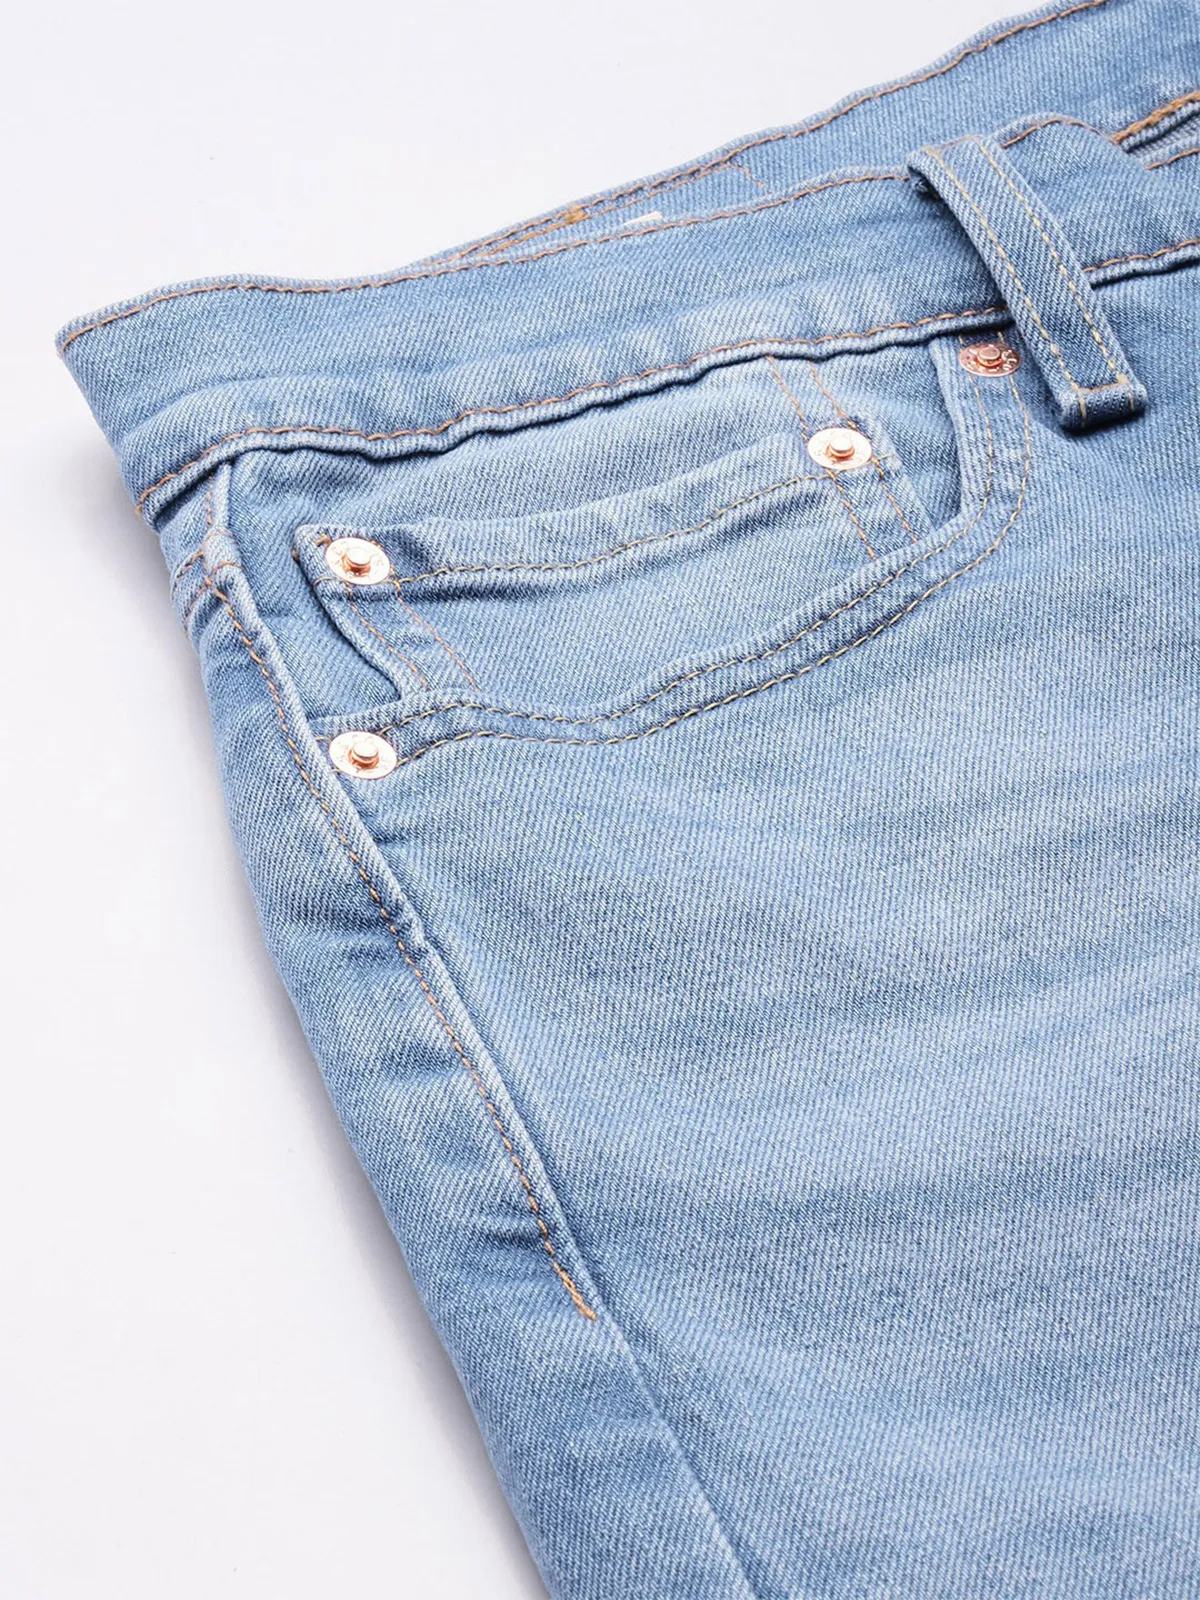 LEVIS washed slim fit jeans in ight blue